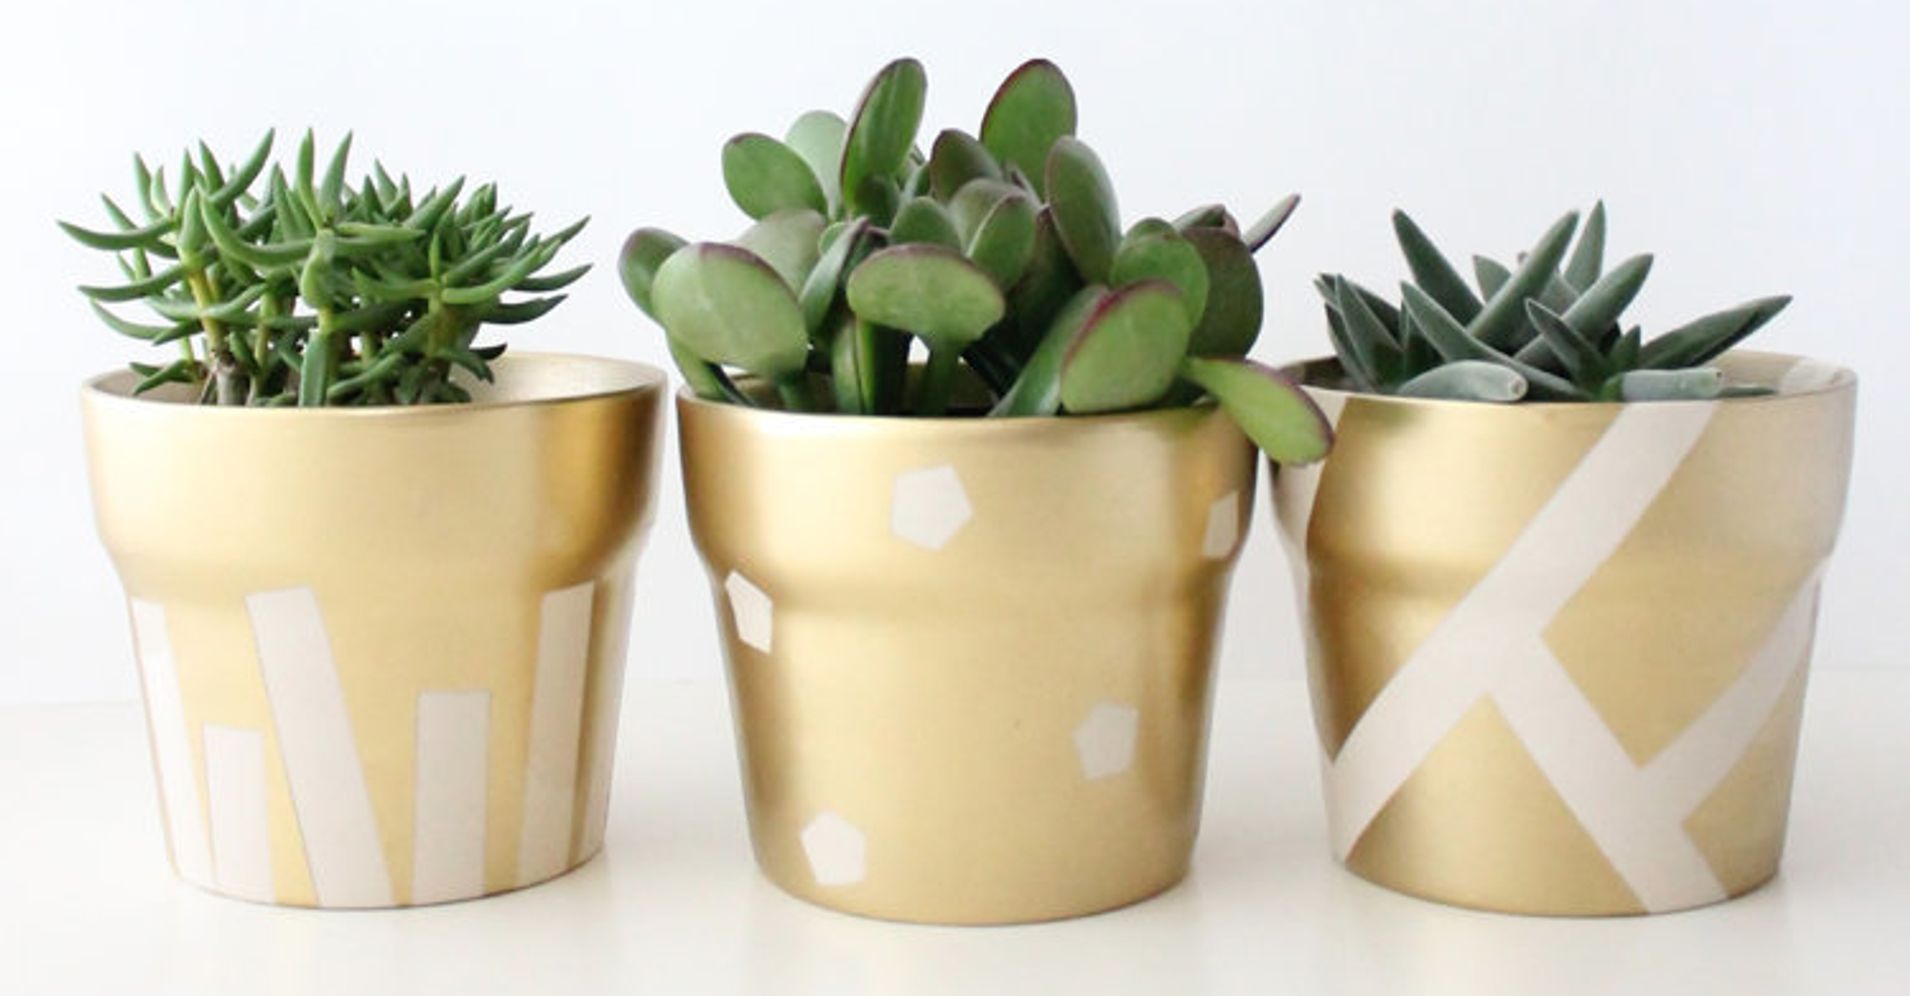 8 Easy DIY Projects To Try This Weekend | HuffPost